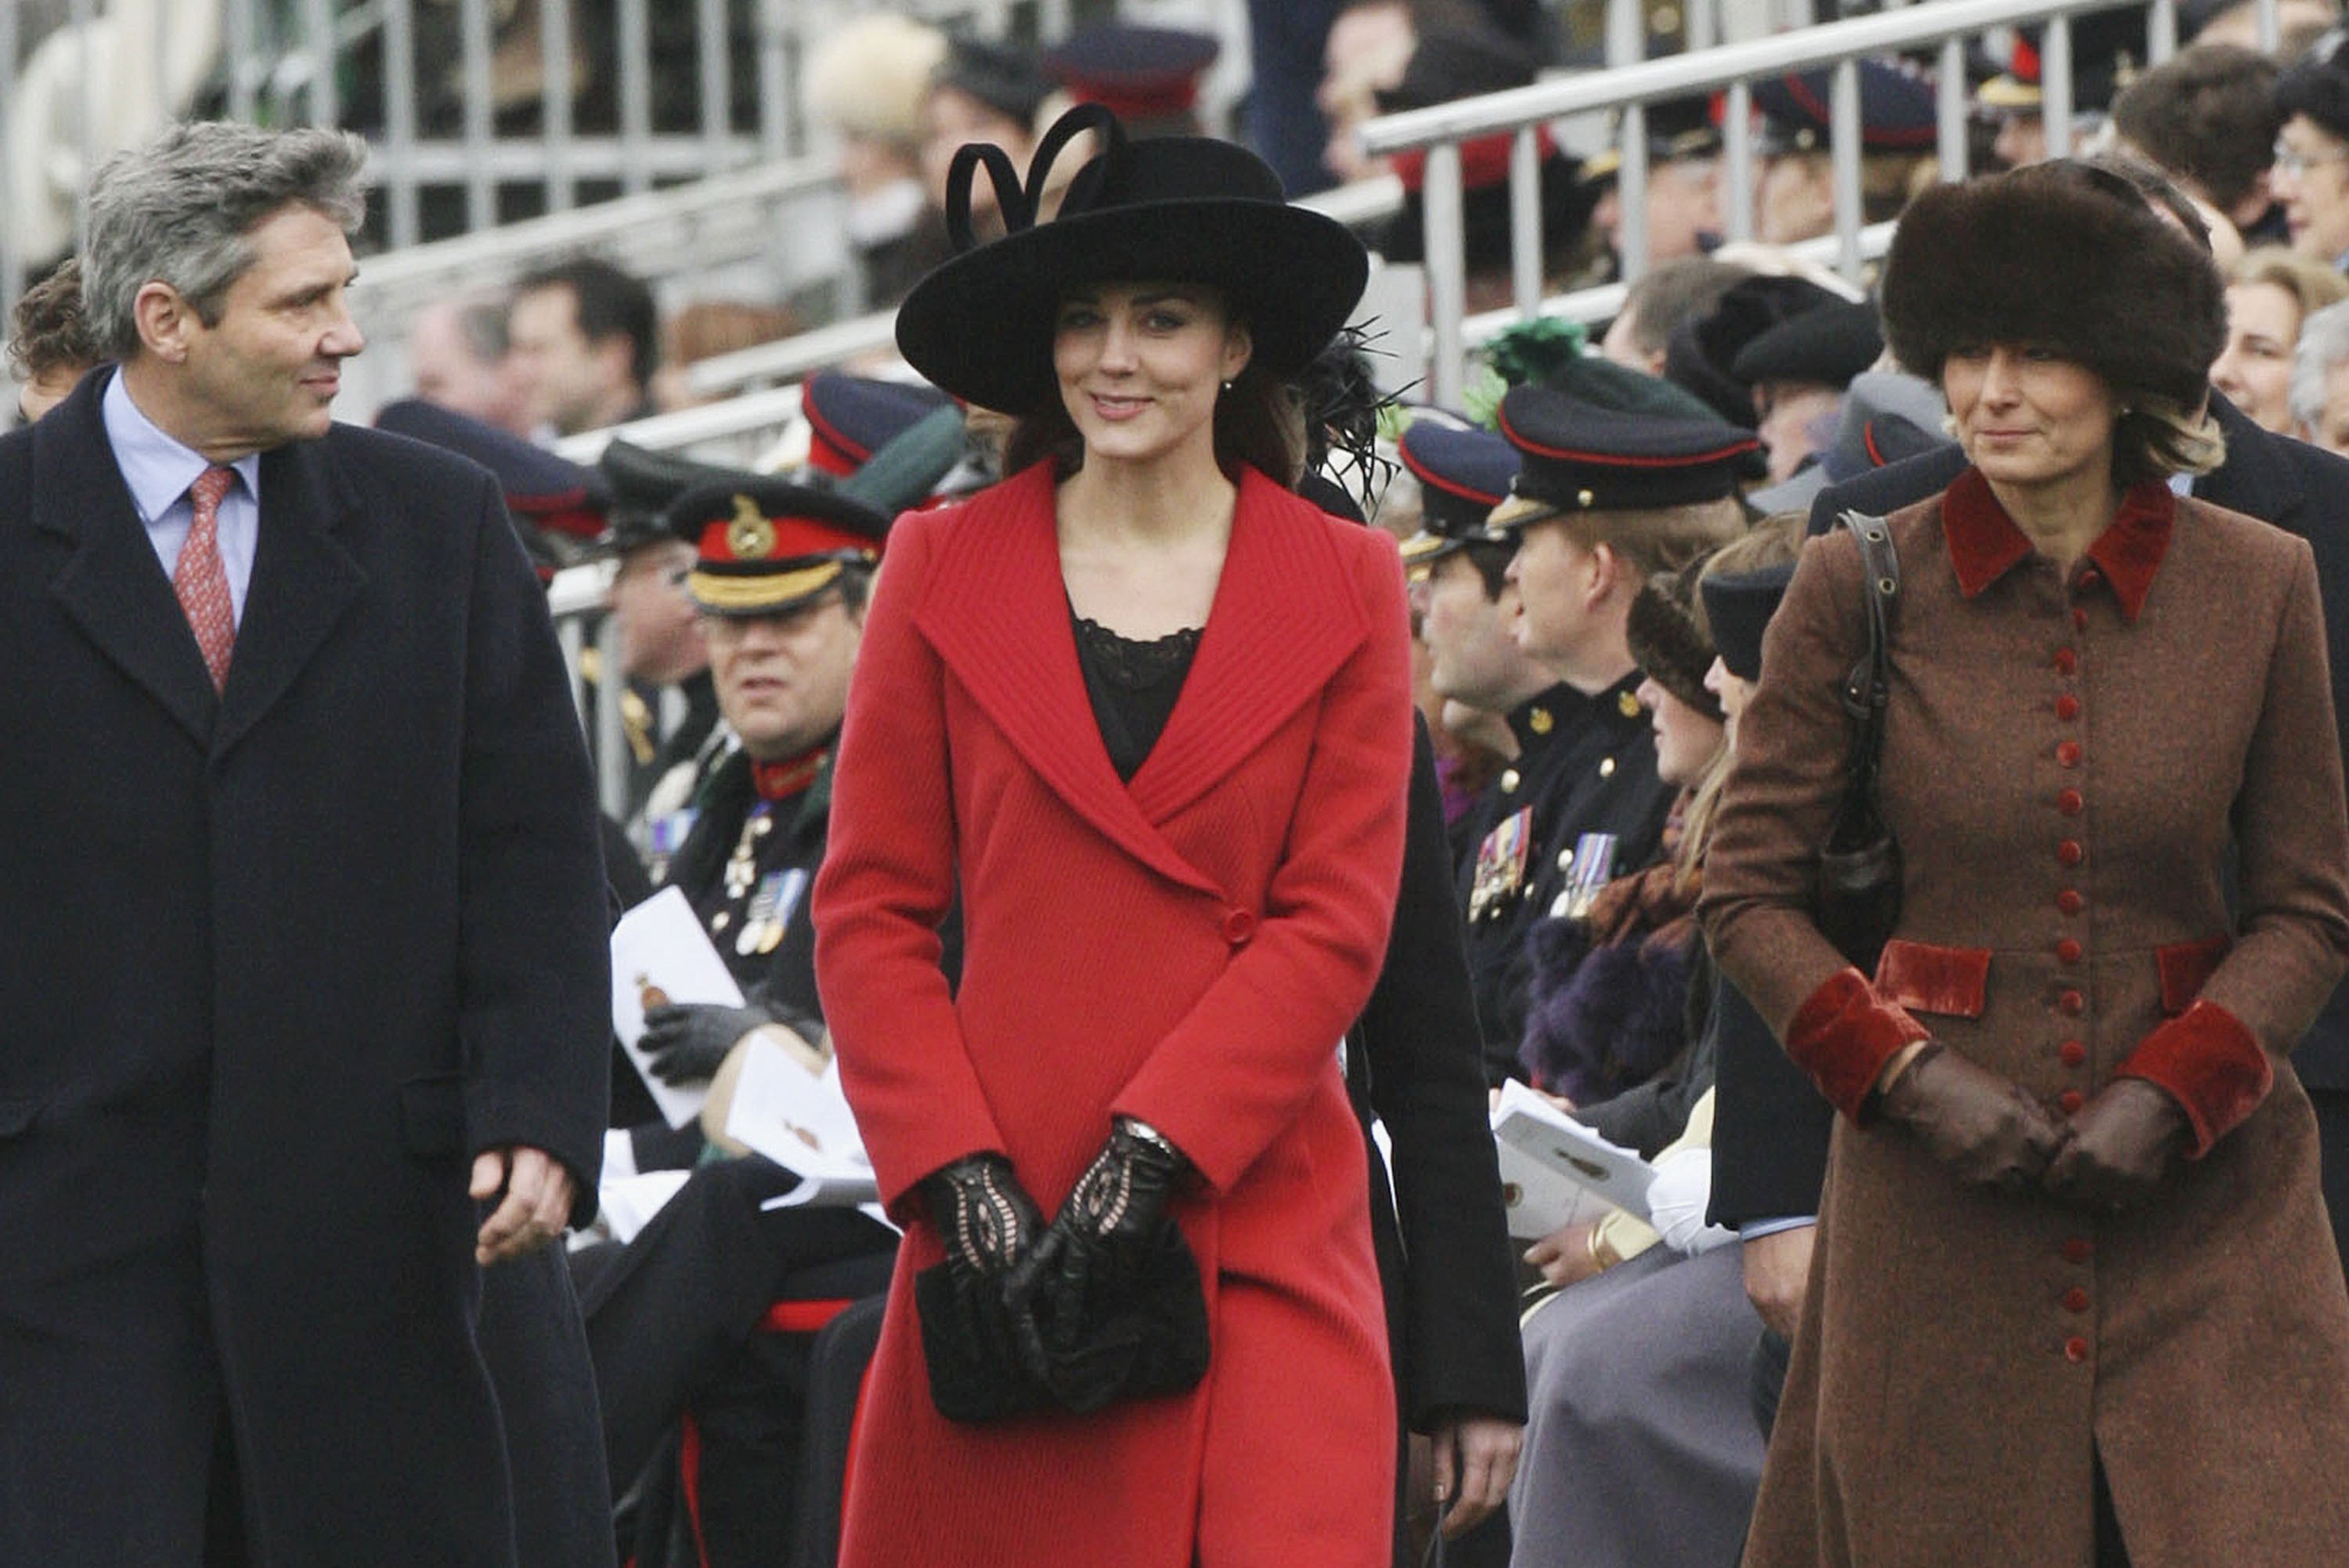 Michael, Kate, and Carole Middleton at the Sovereign's Parade at Sandhurst Military Academy on December 15, 2006, in Surrey, England | Source: Getty Images